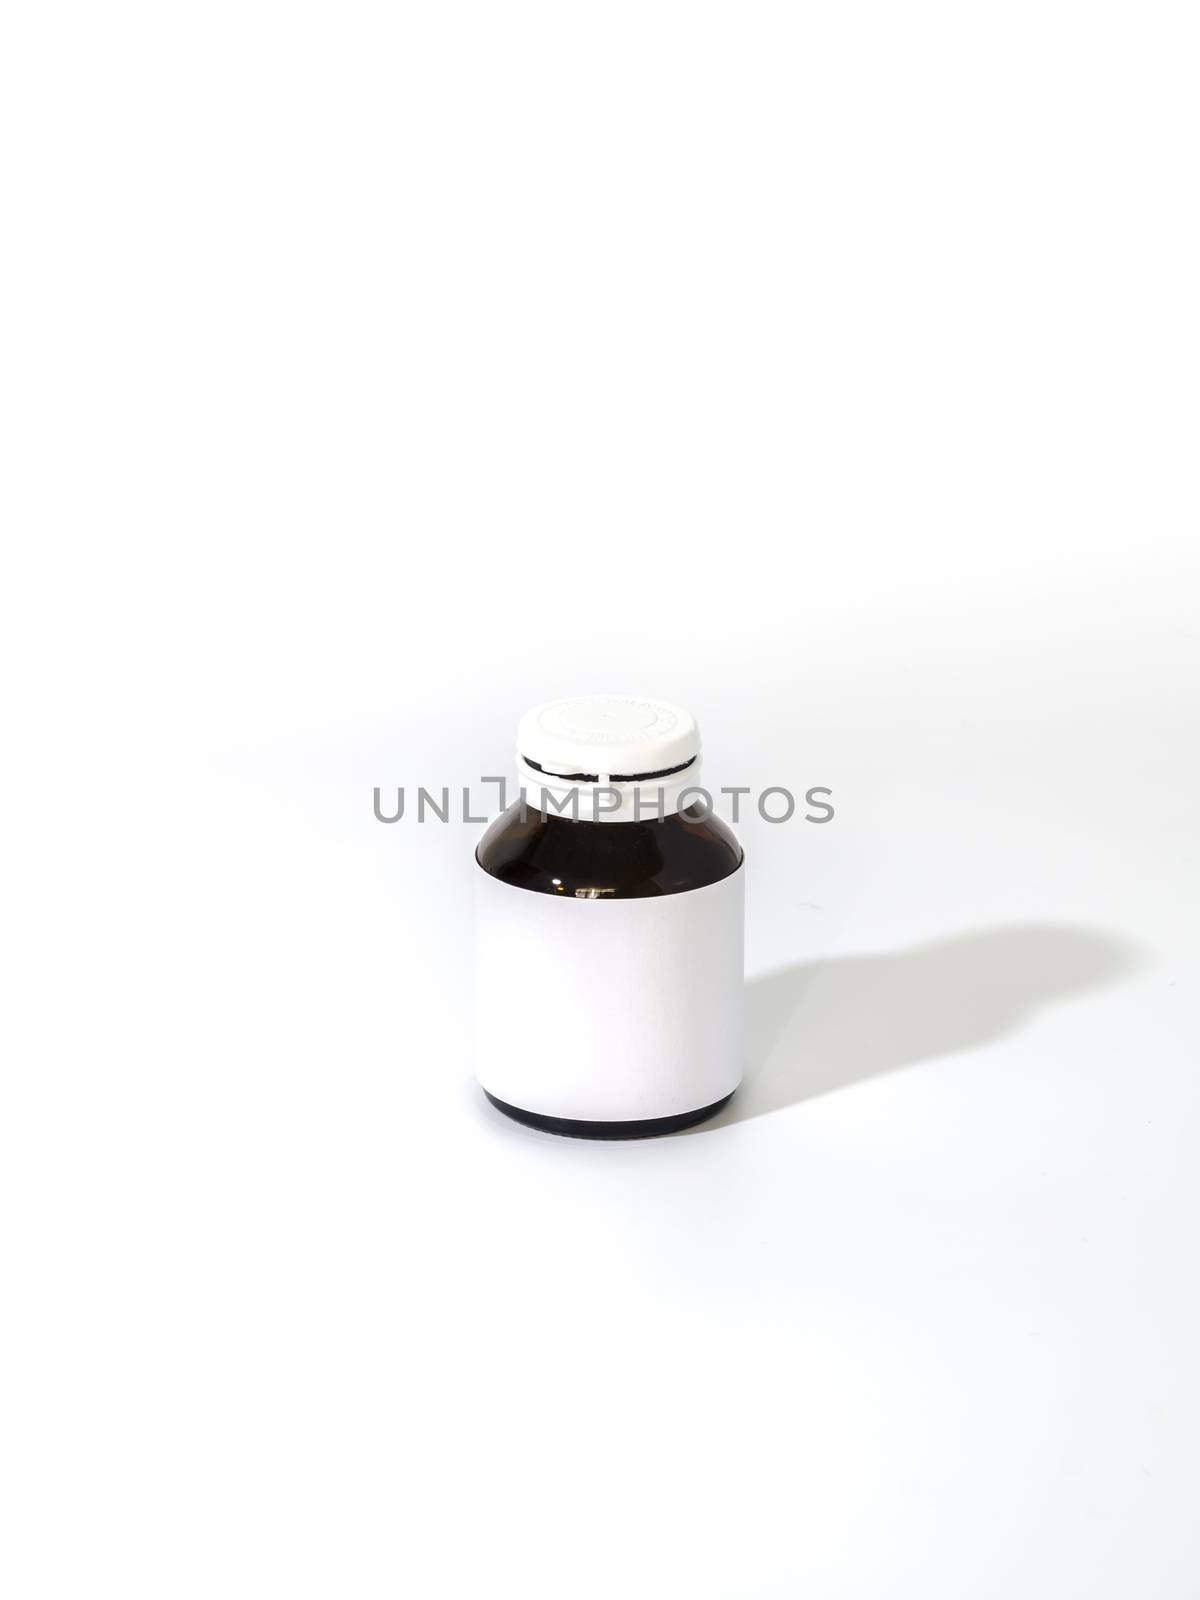 empty pill bottle on a white background